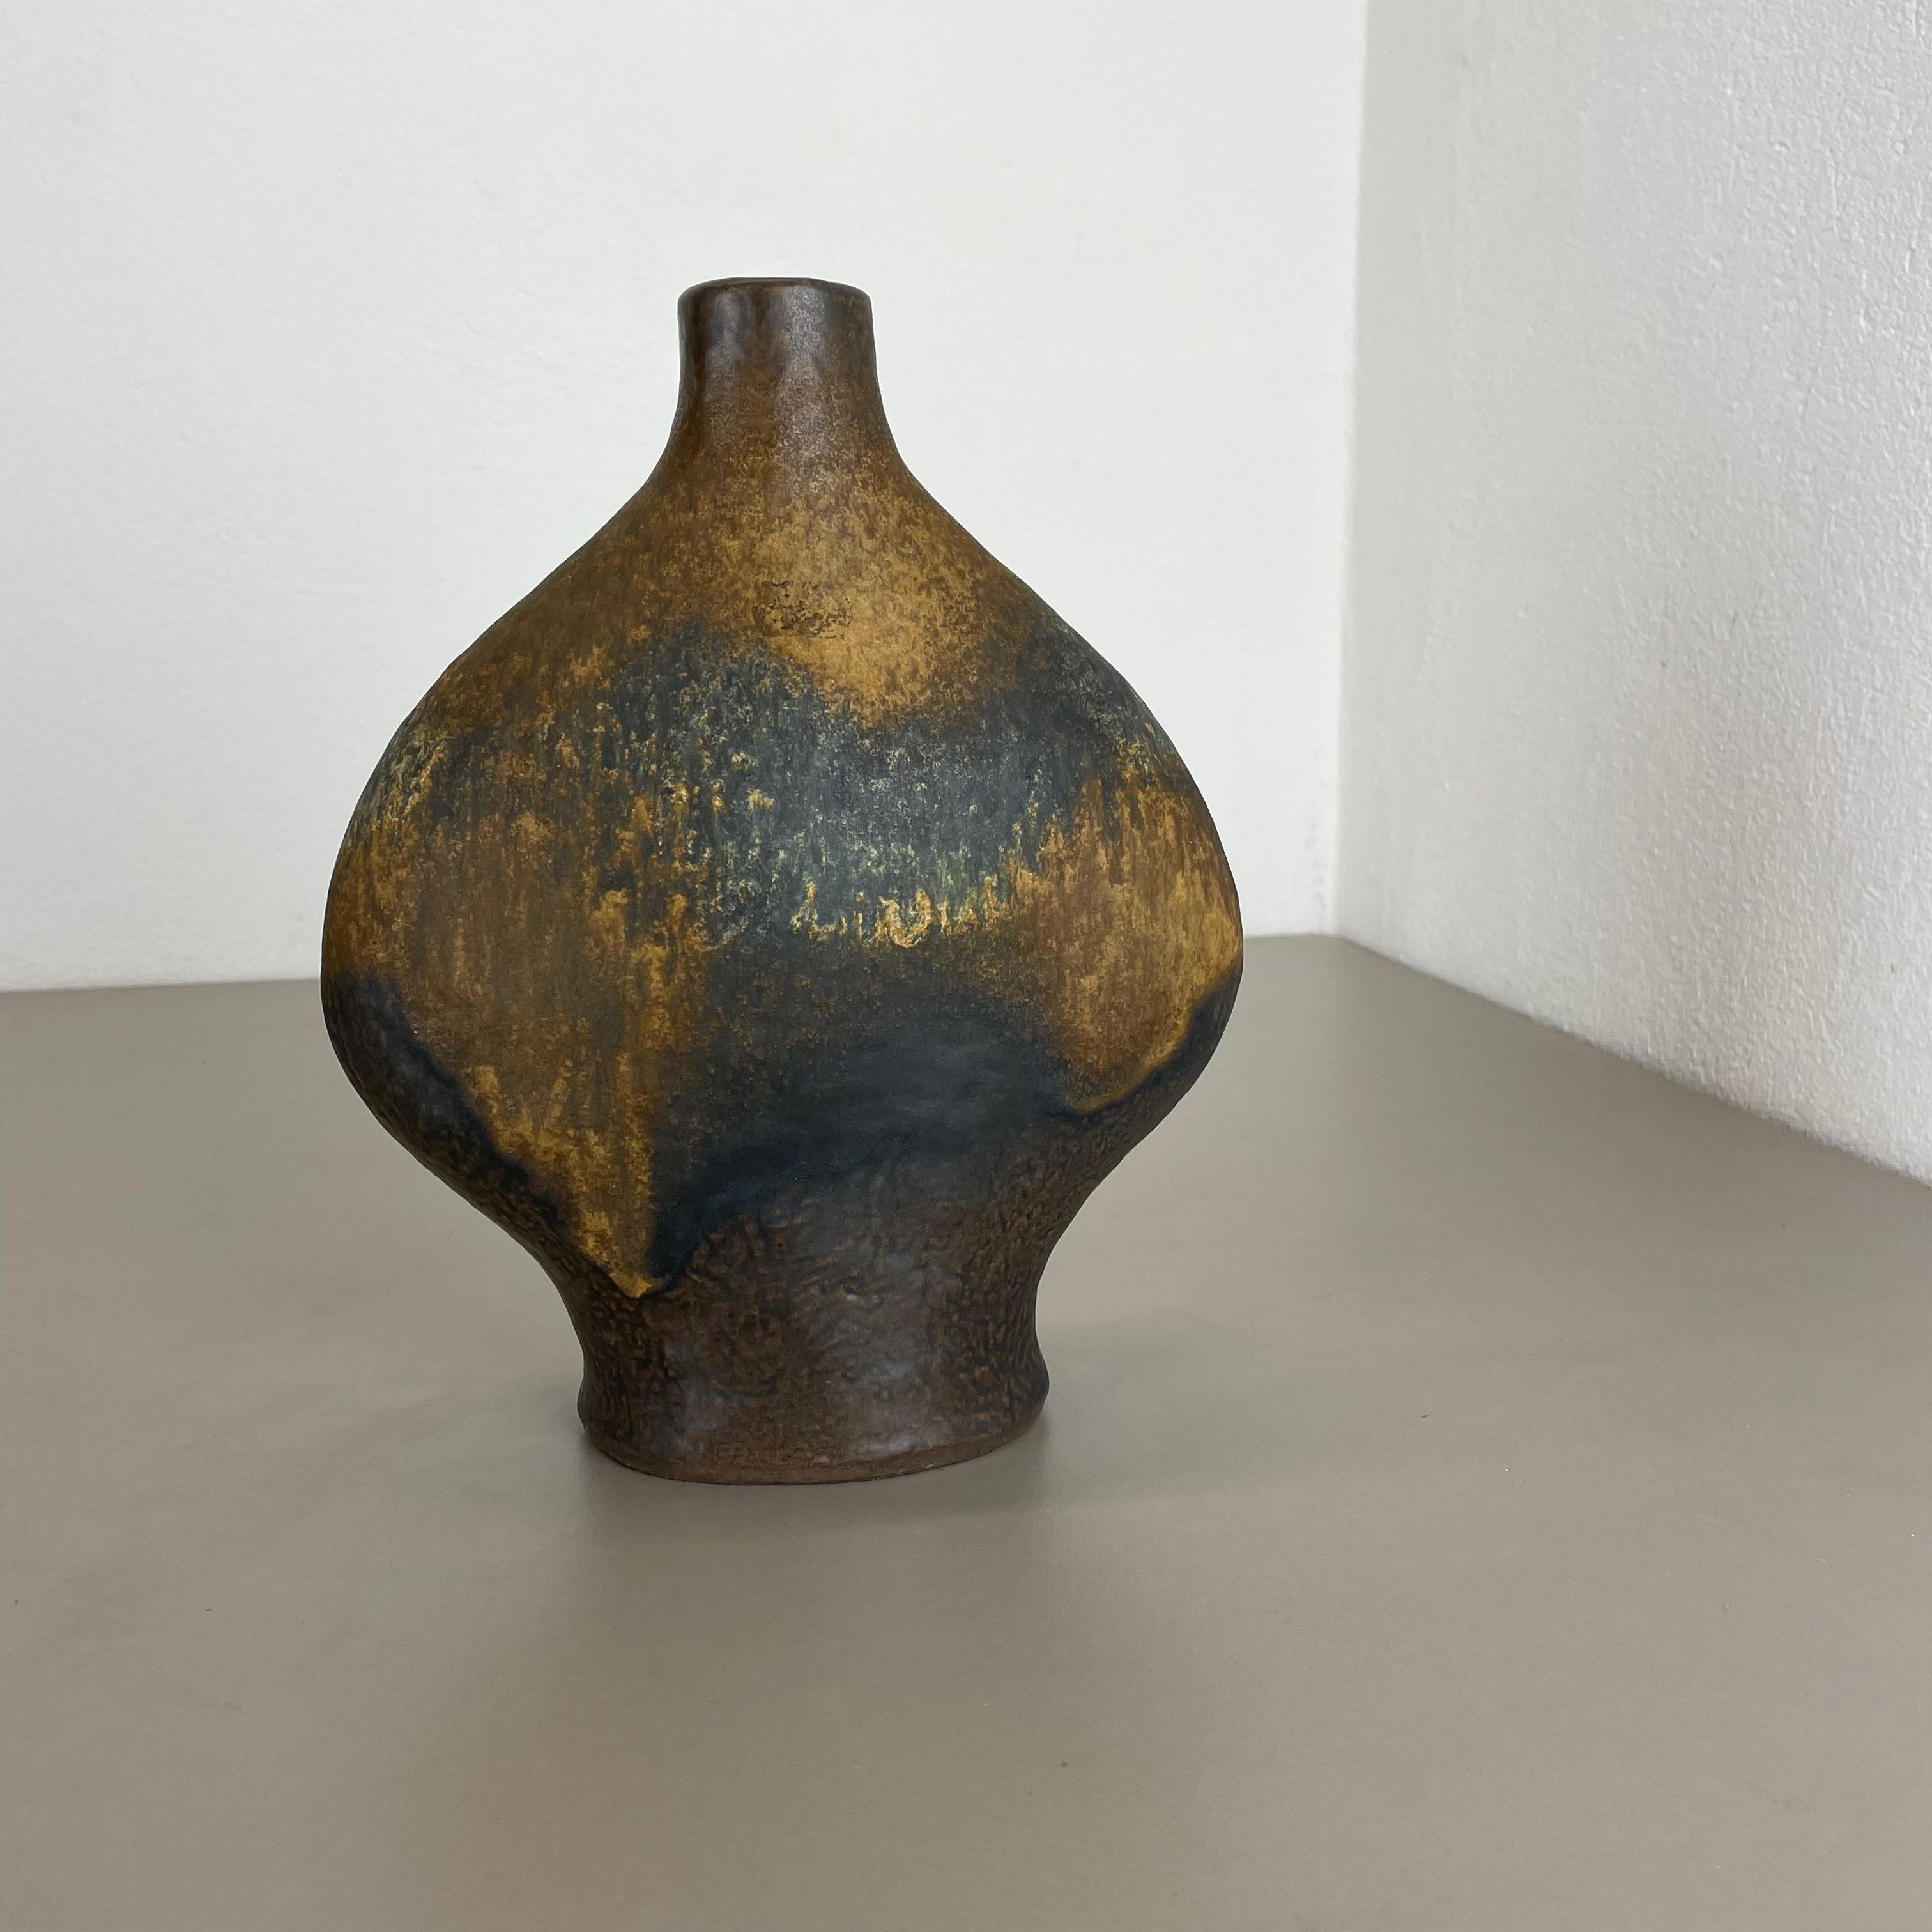 Article:

Ceramic pottery vase


Origin:

Germany


Designer:

Gerda Heukeroth


Producer:

Carstens Tönnieshof, Germany


Decade:

1970s


This original vintage Pottery Object was designed by Gerda Heukeroth and produced by